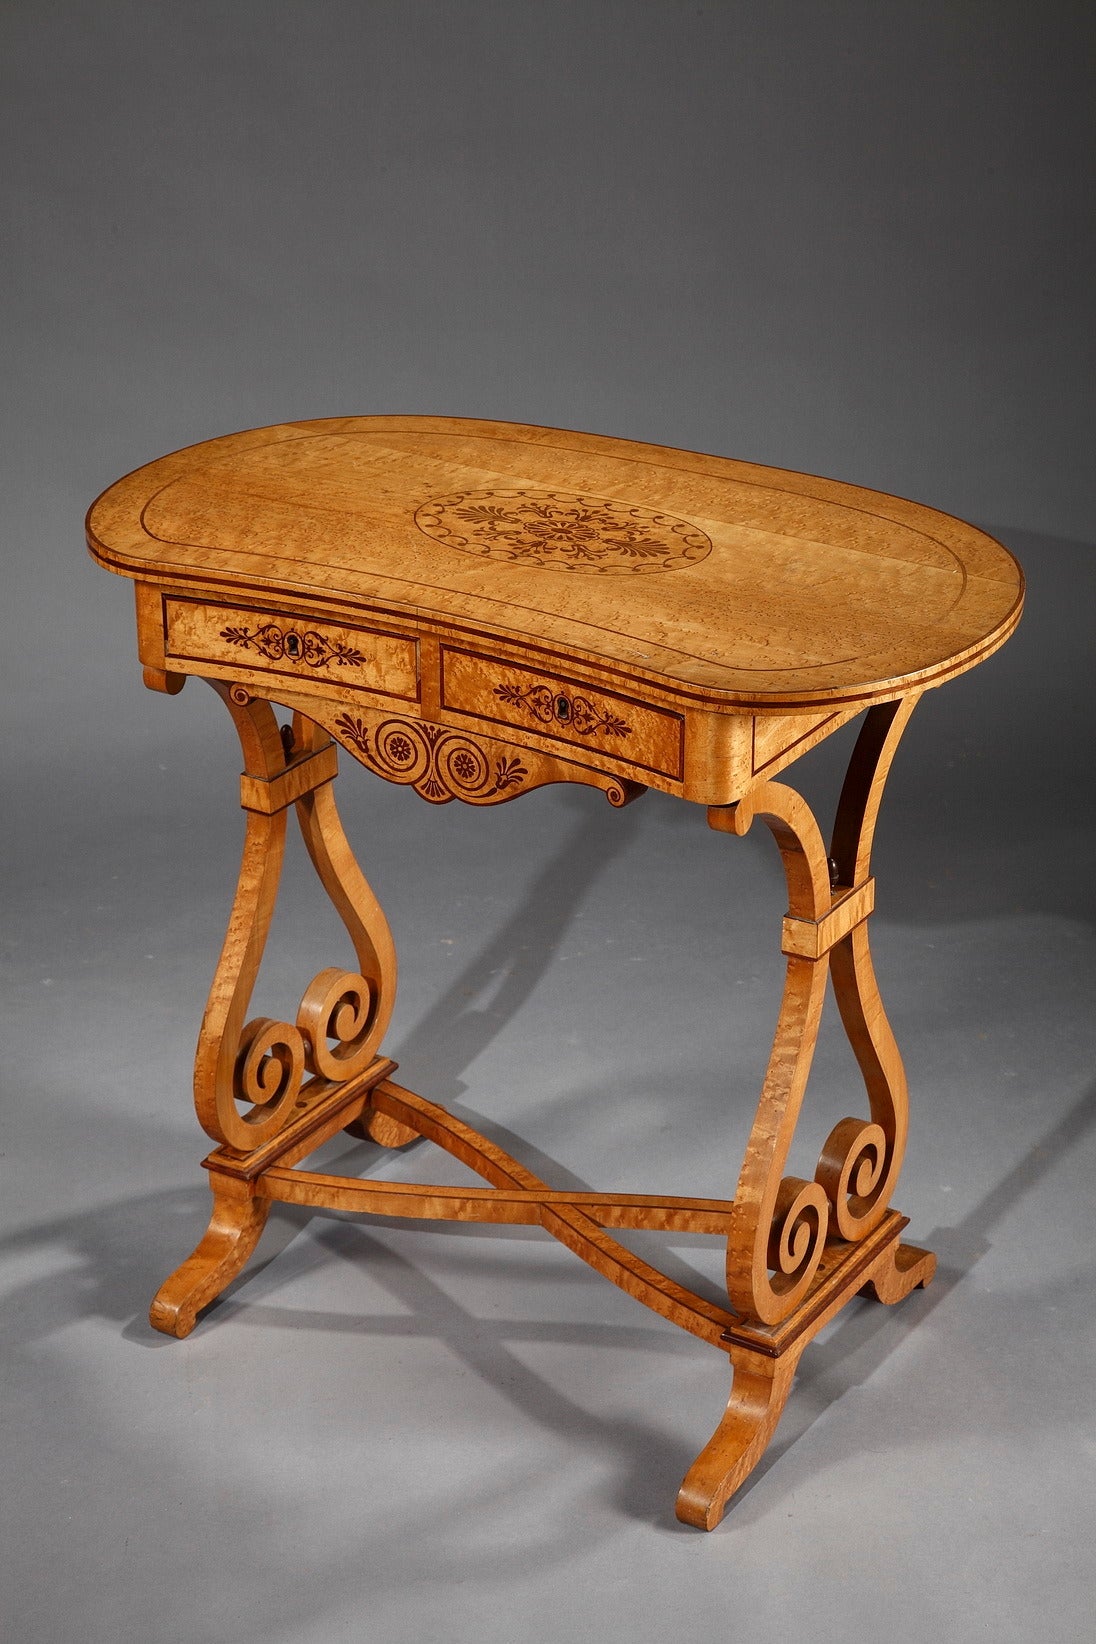 A very fine Charles X writing table veneered with lemonwood and amaranth. The kidney-shaped top is veneered with lines of amaranth and a central medallion with stylized palm leaves. The belt presents a frieze of amaranth marquetry. This table opens